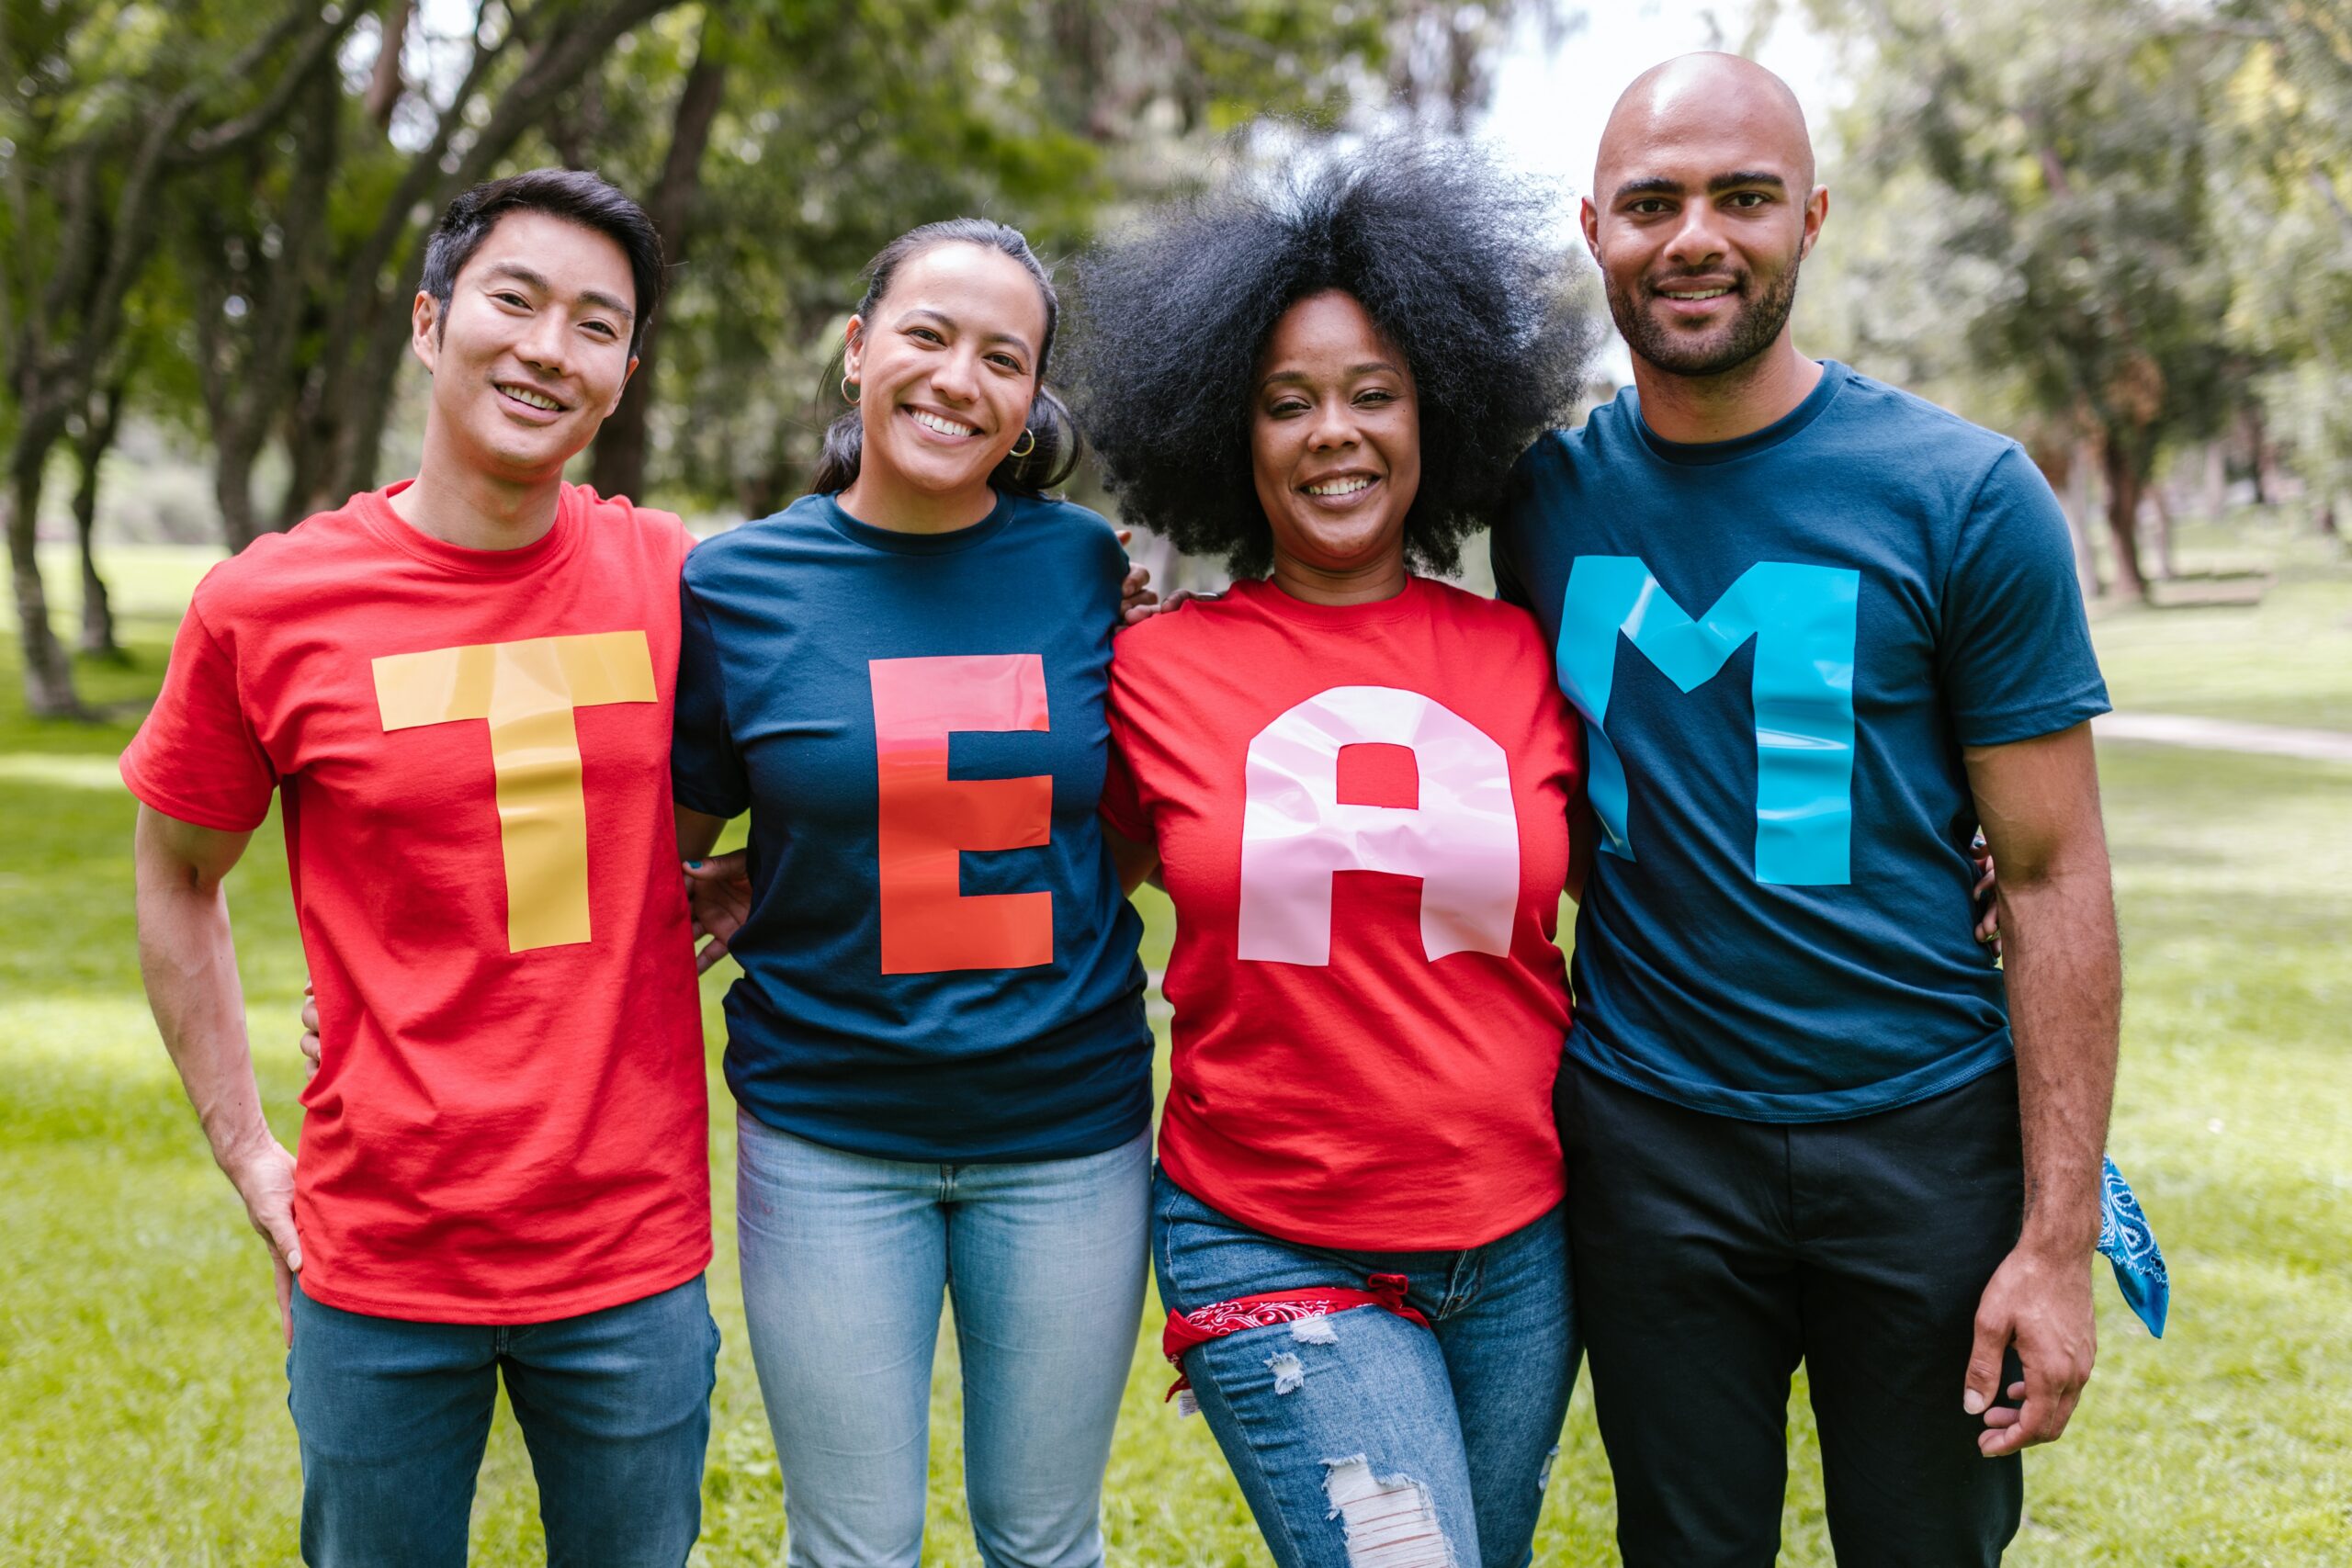 People posing for a photo with shirts spelling out "Team"